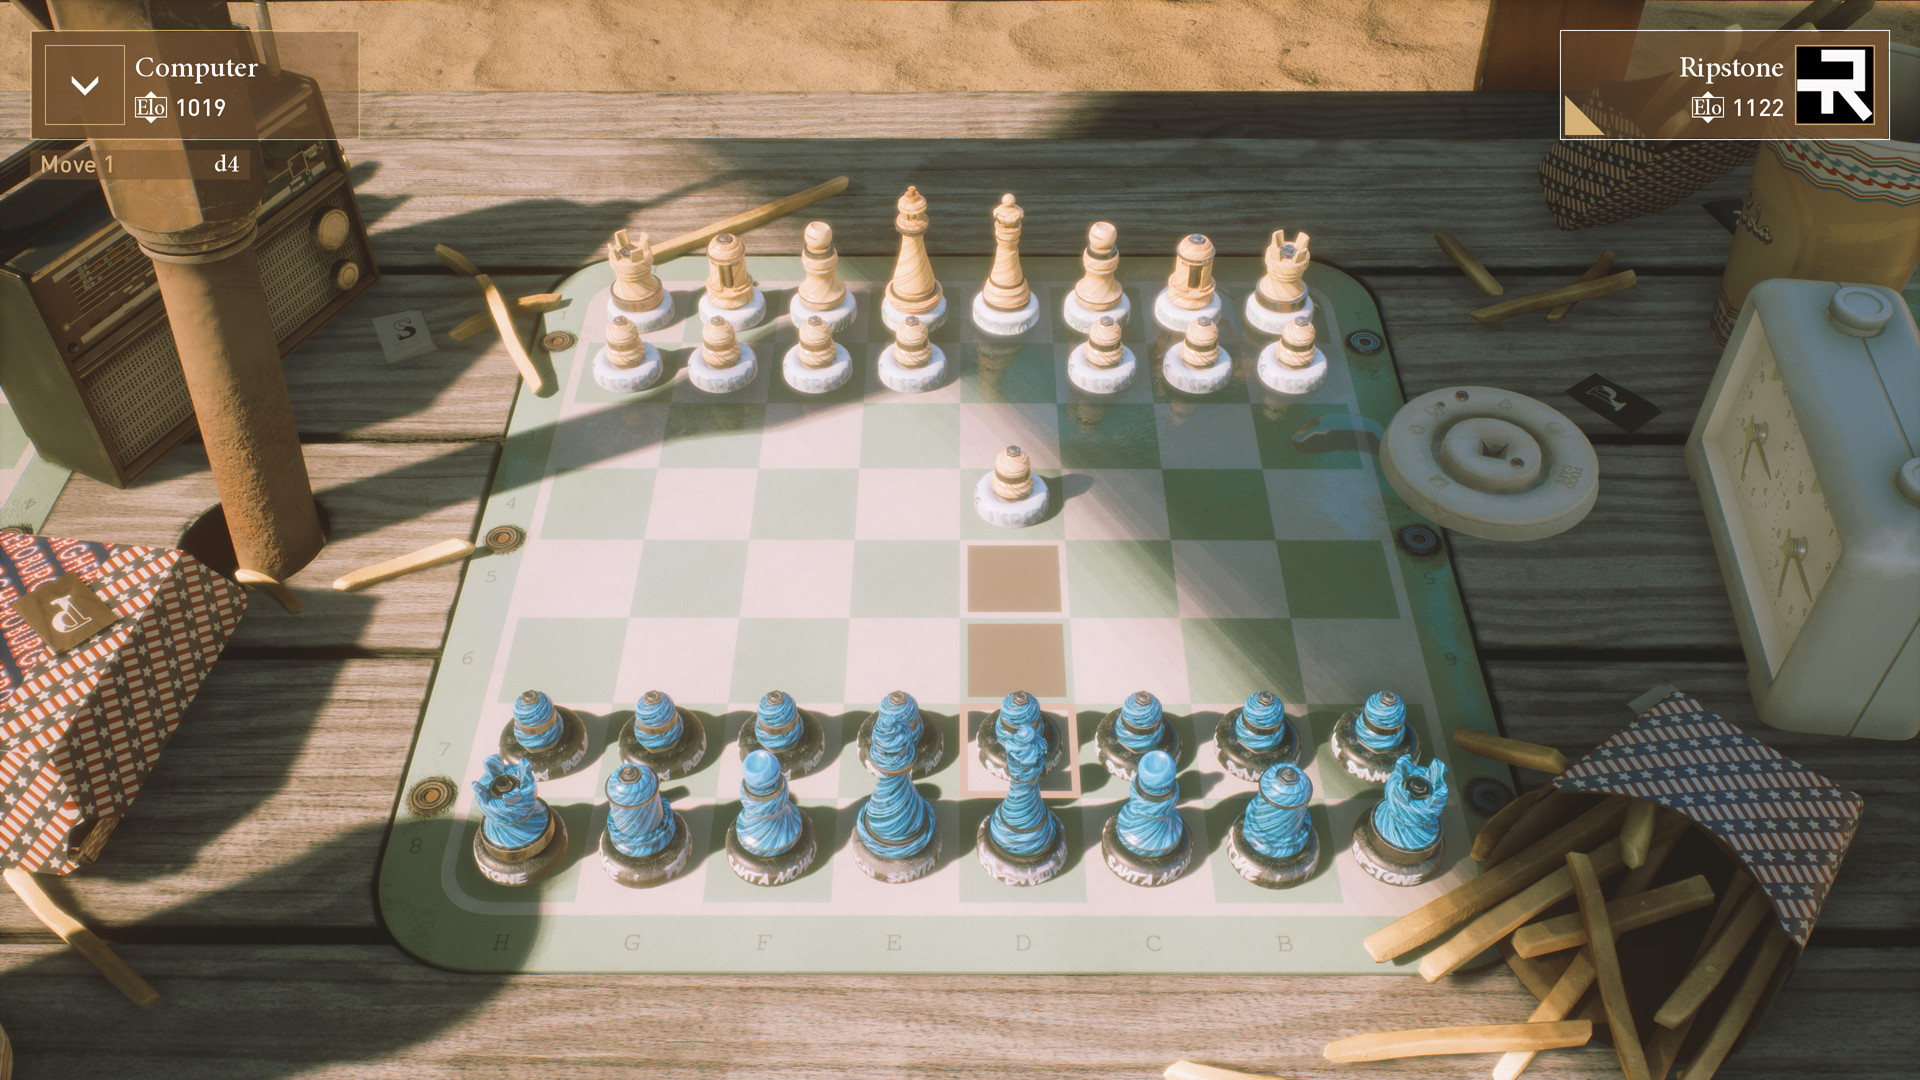 Grab the FREE Game: Chess Ultra - Epic Bundle